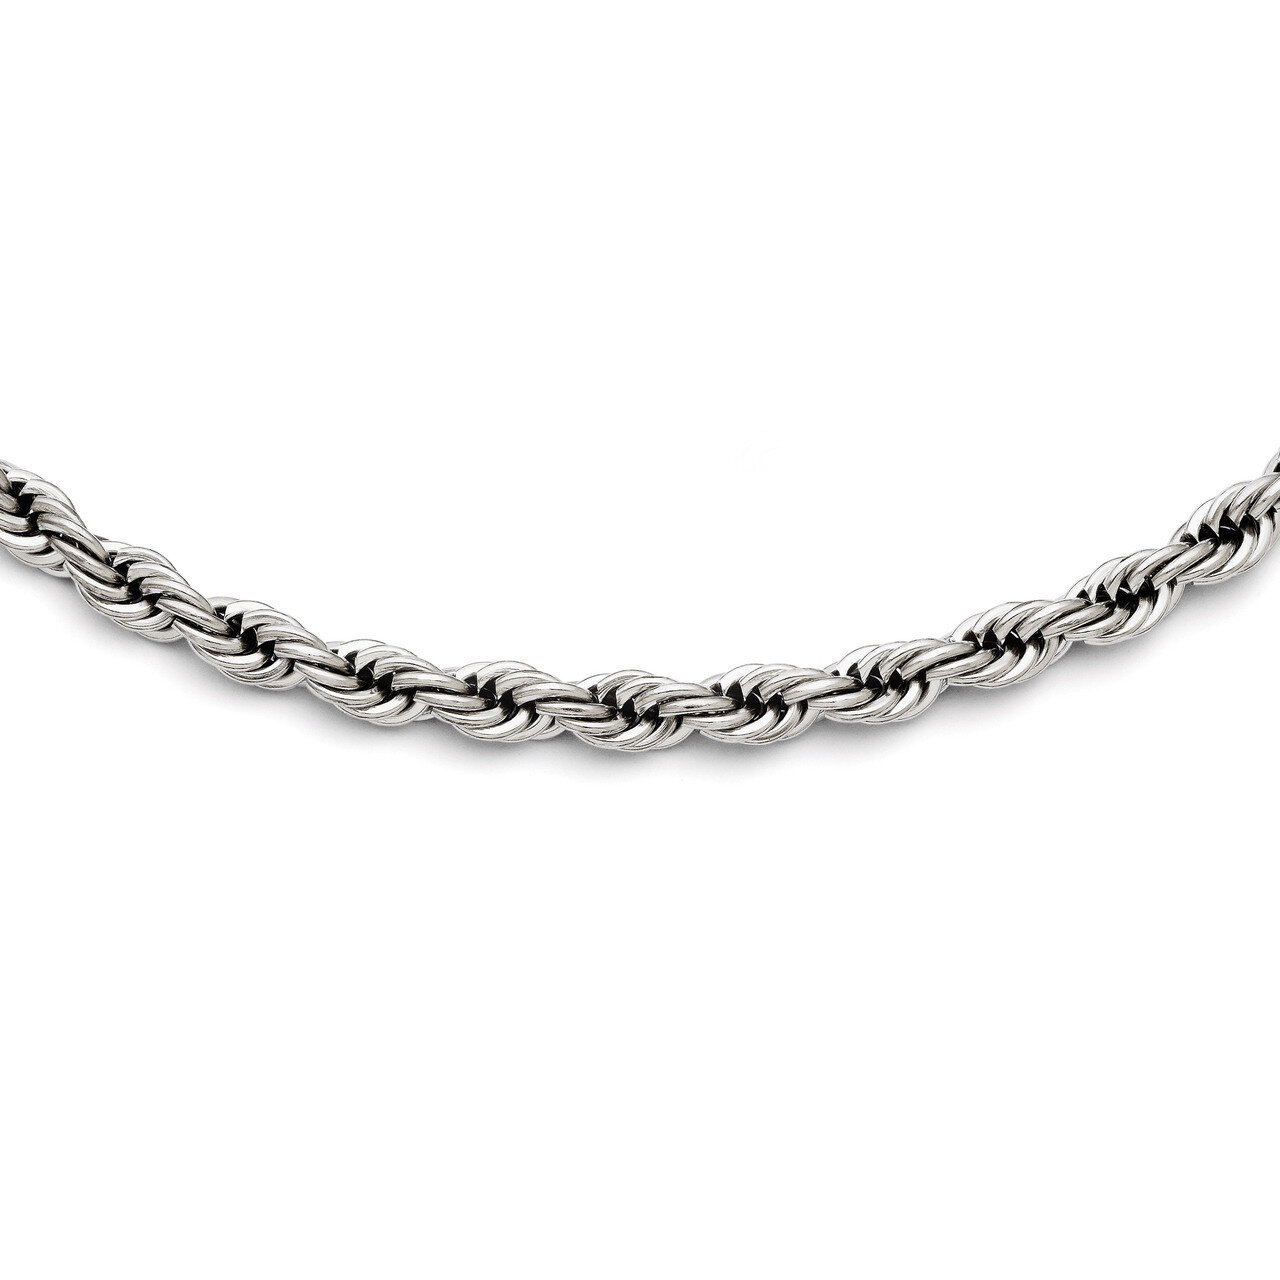 Polished 7mm Rope Necklace - Stainless Steel SRN1244